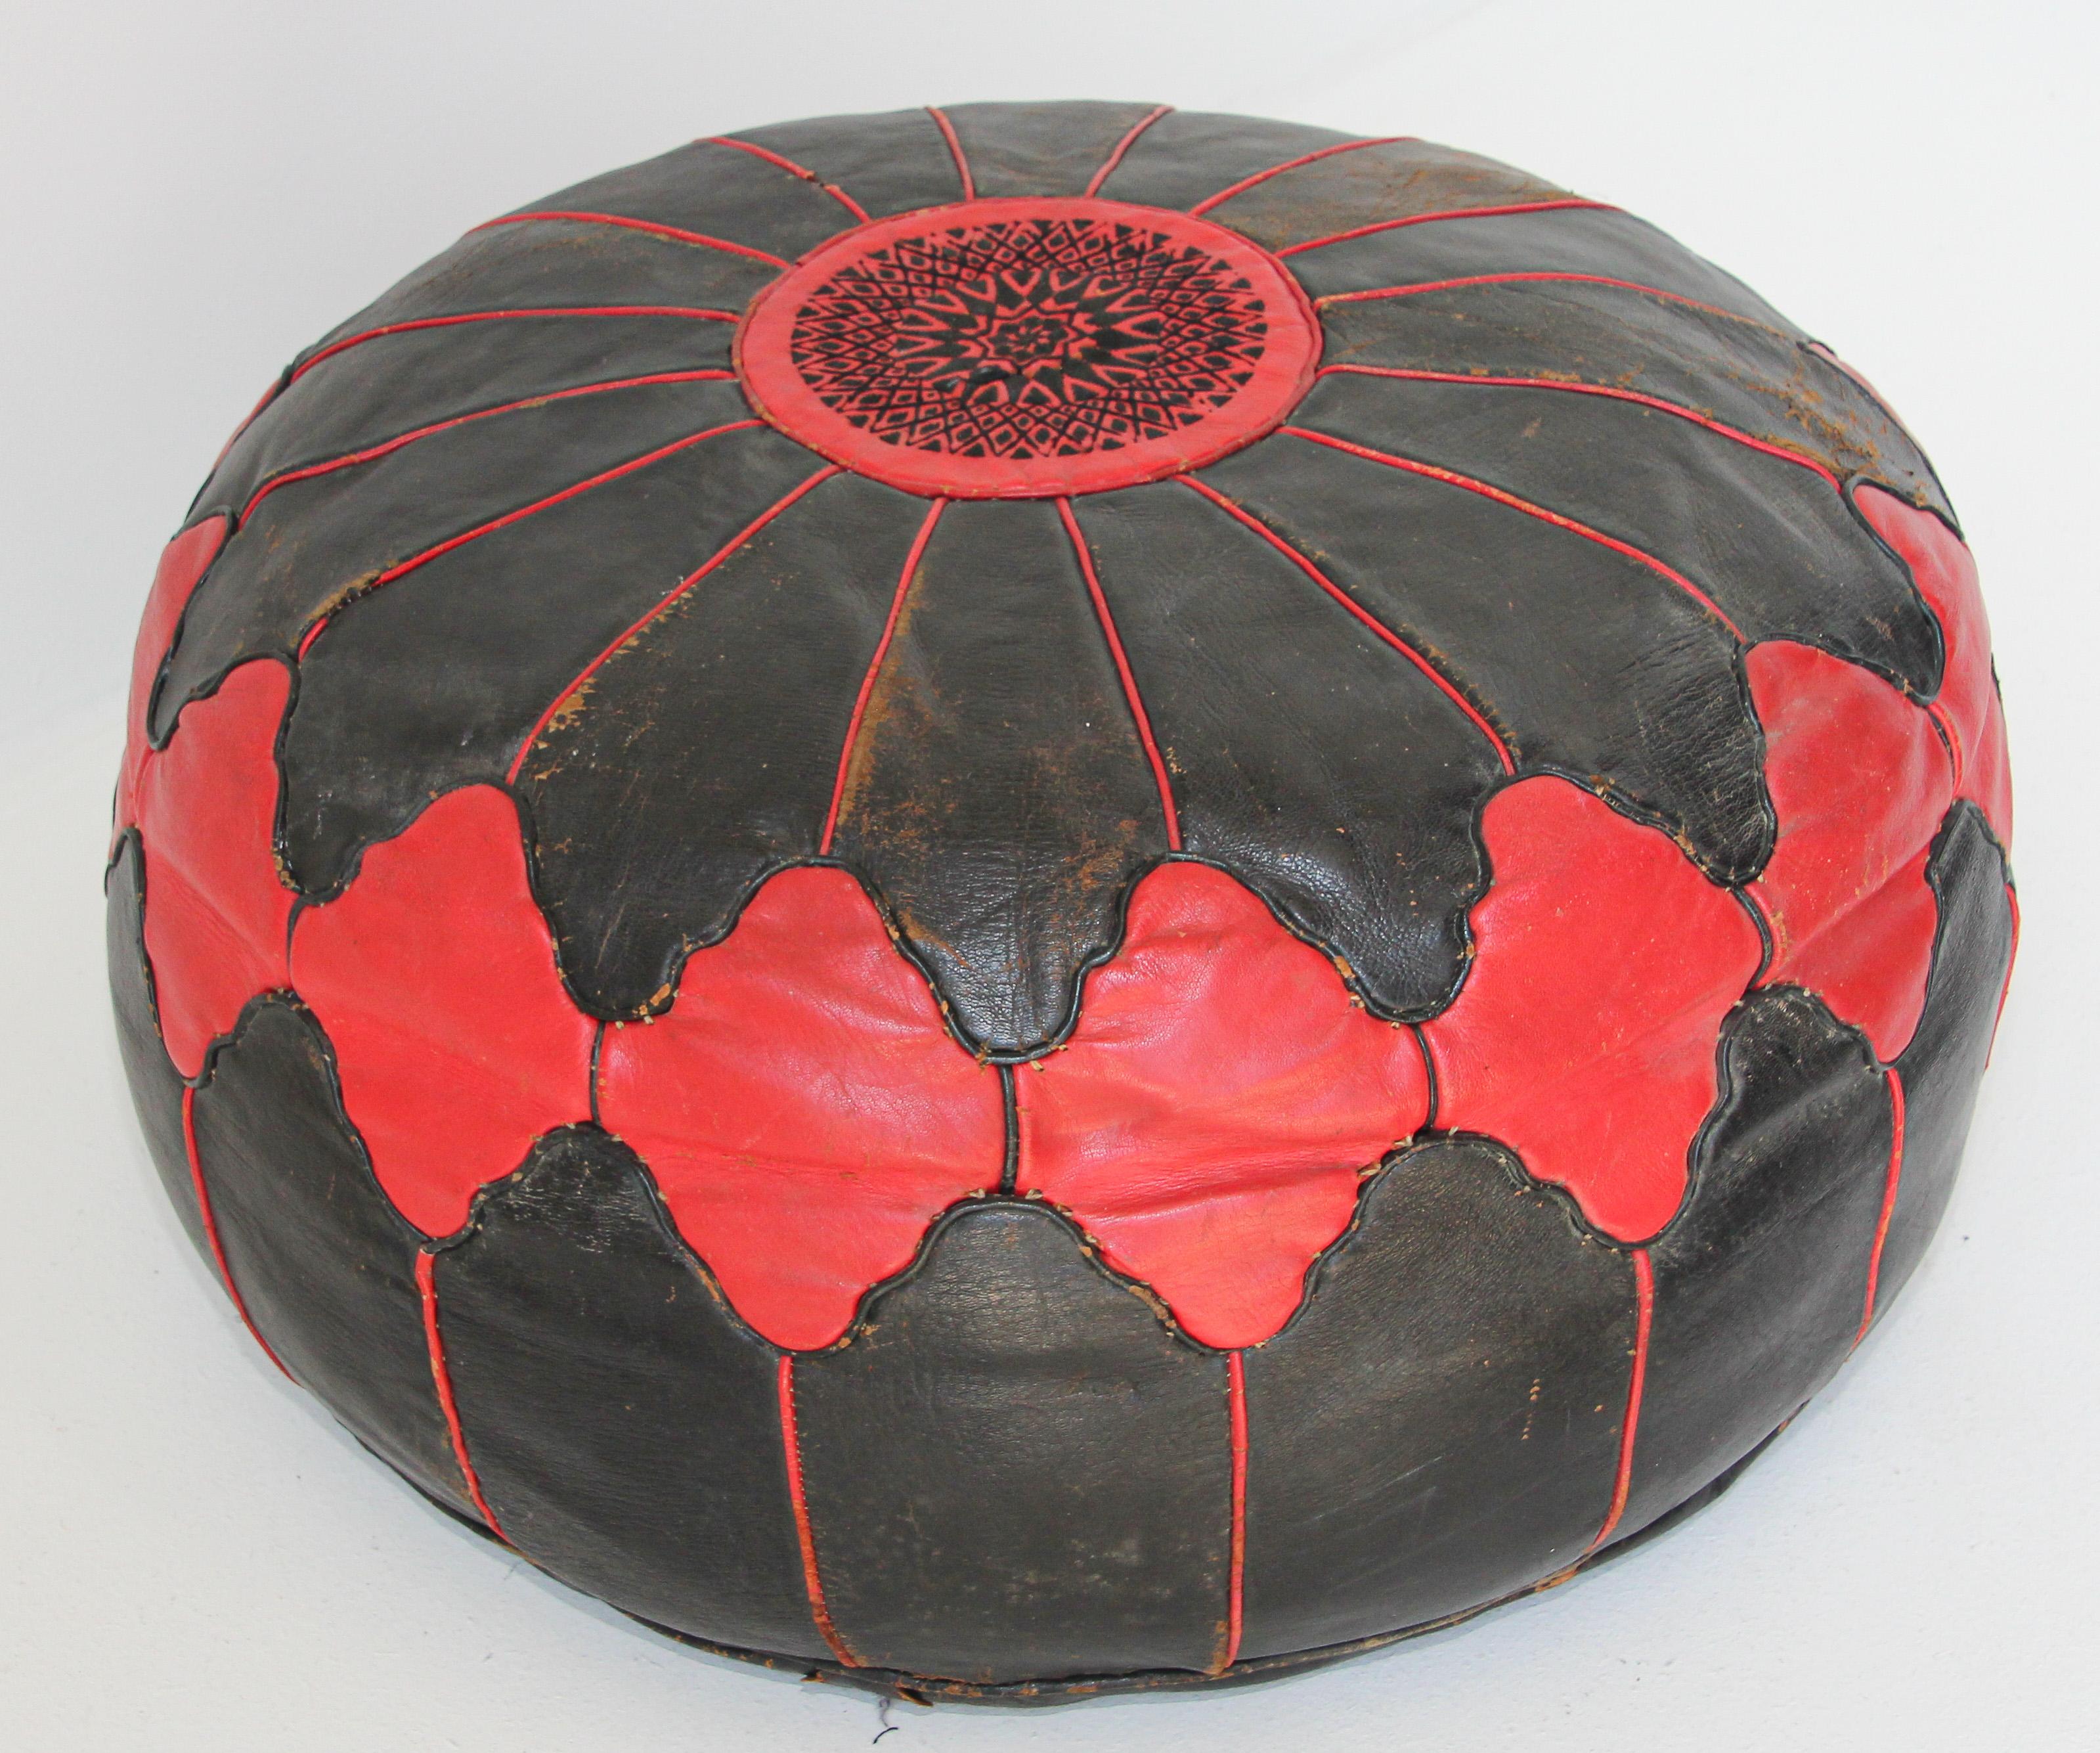 Large vintage round Moroccan leather pouf, handcrafted in red and black leather.
Hand tooled and embroidered on the top with the Moorish star by Moroccan artisans in Marrakech.
Vintage circa 1970s.
Vintage condition, wear and worn see pictures.
2